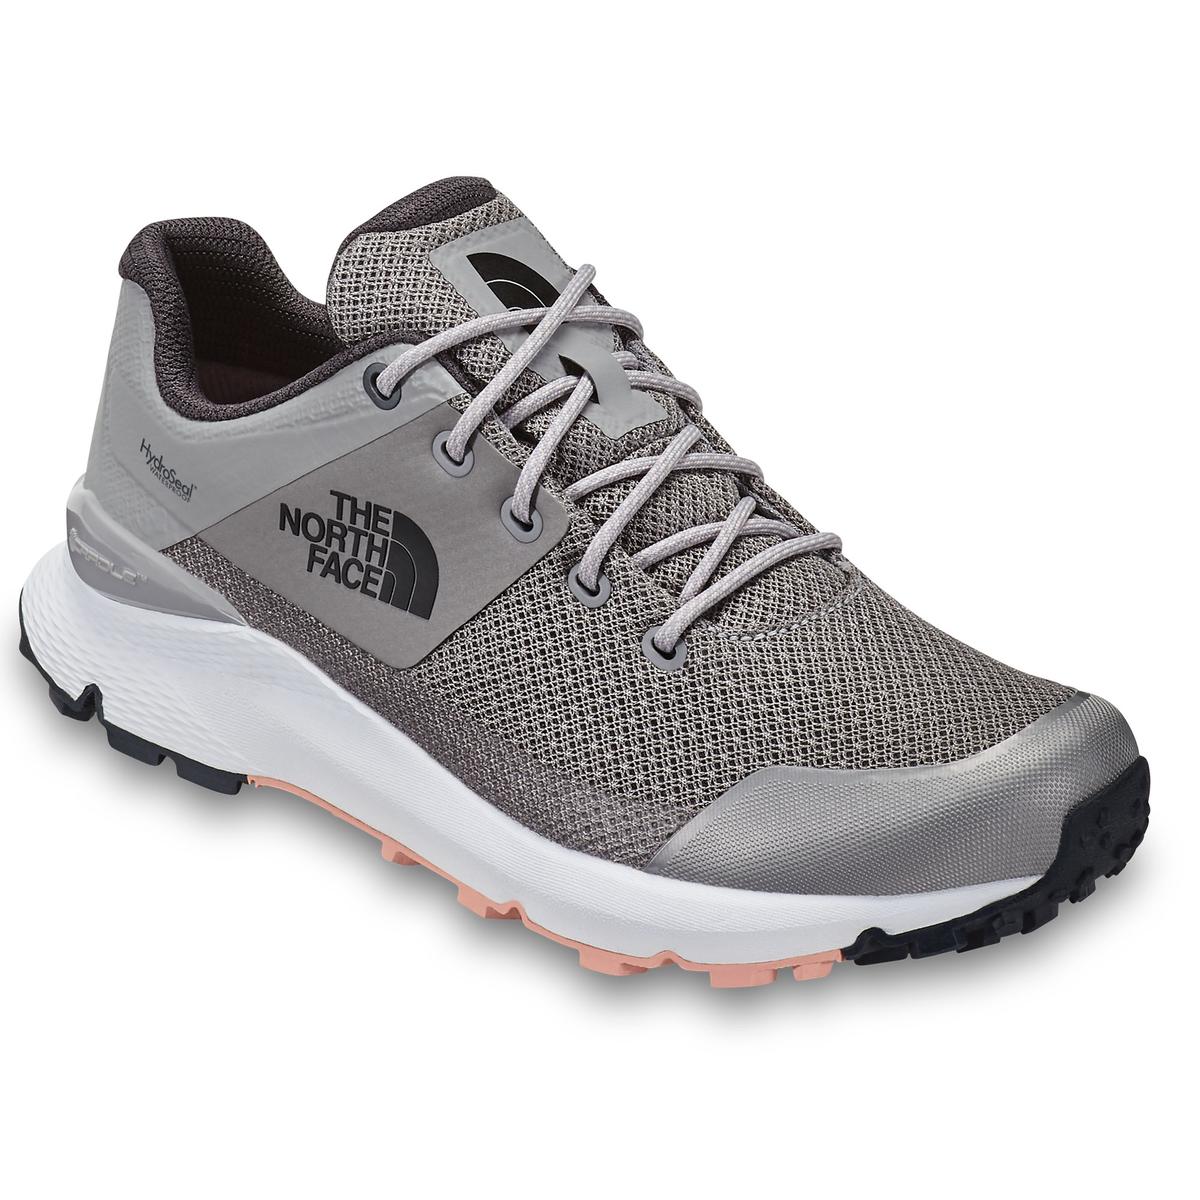 The North Face Women's Vals Waterproof Hiking Shoes - Sun & Ski Sports